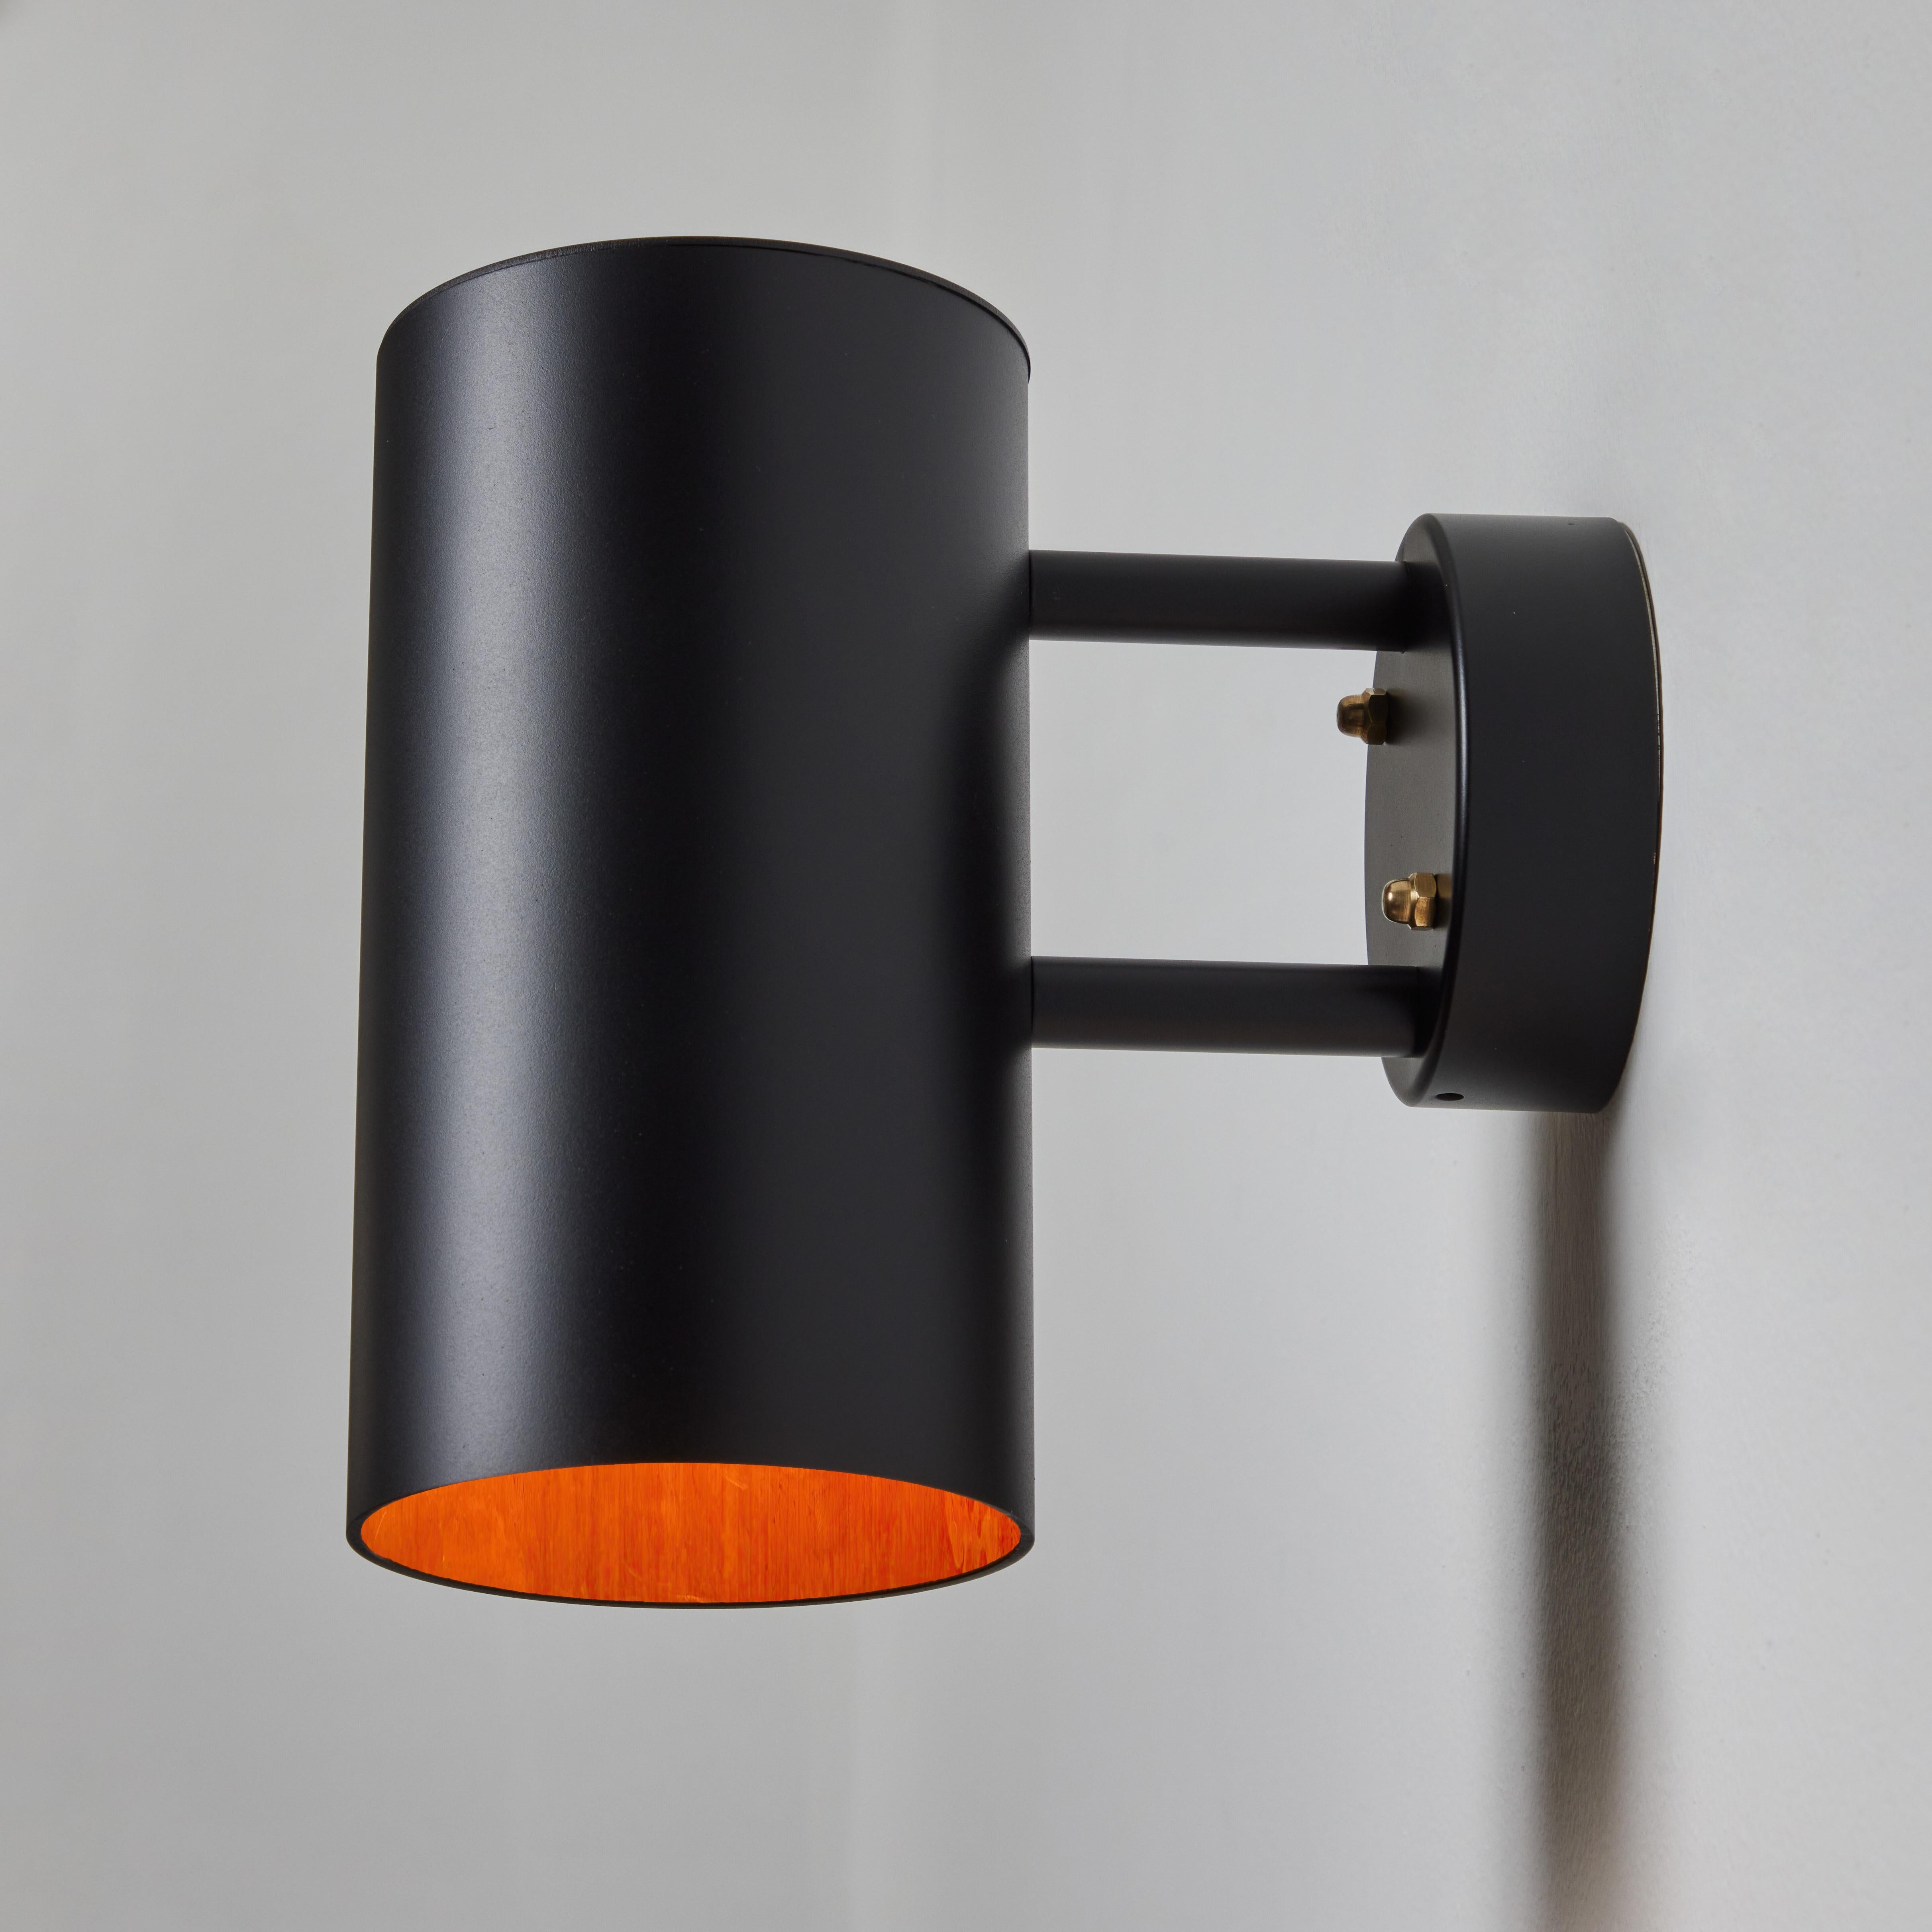 Hans-Agne Jakobsson C627/110 'Rulle' outdoor sconce in black. An exclusive made for U.S. and UL listed authorized re-edition of the classic Swedish design executed in black painted metal with a raw metal interior that will continue to develop a